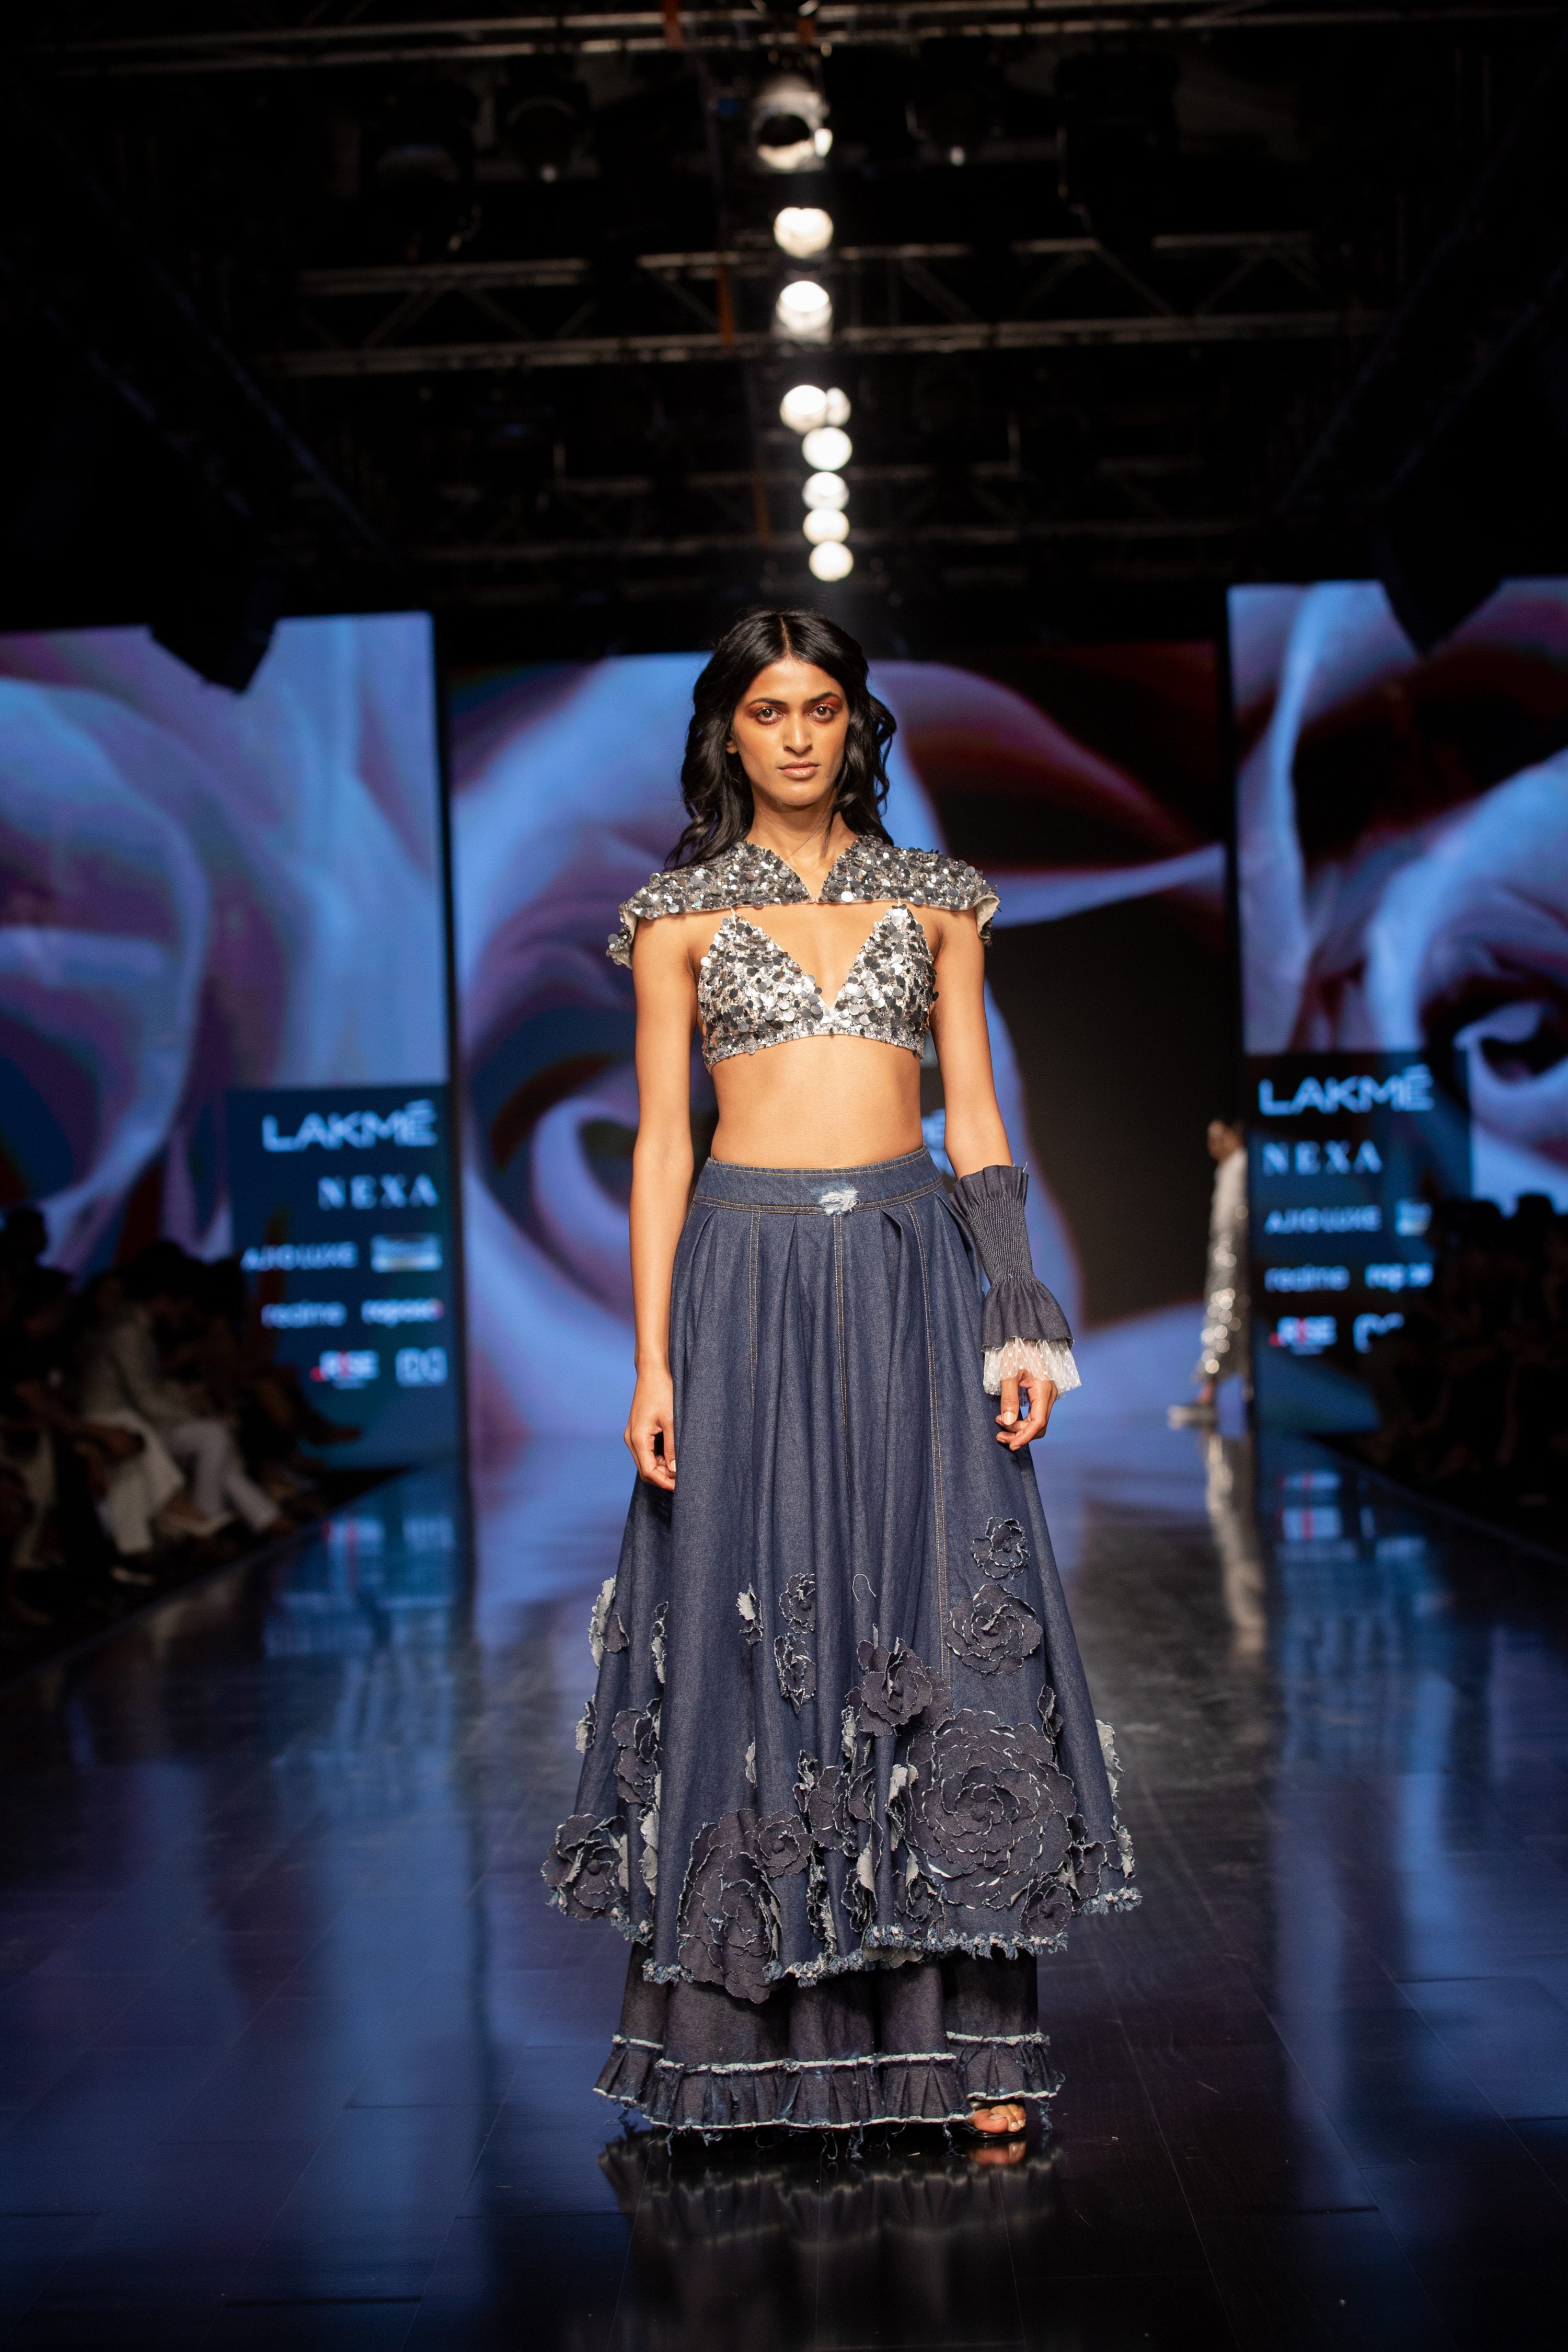 Lakme Fashion Week 2020: Our Favorite #BridalPicks From The Runway! |  Indian bride outfits, Lakme fashion week, Indian bridal dress